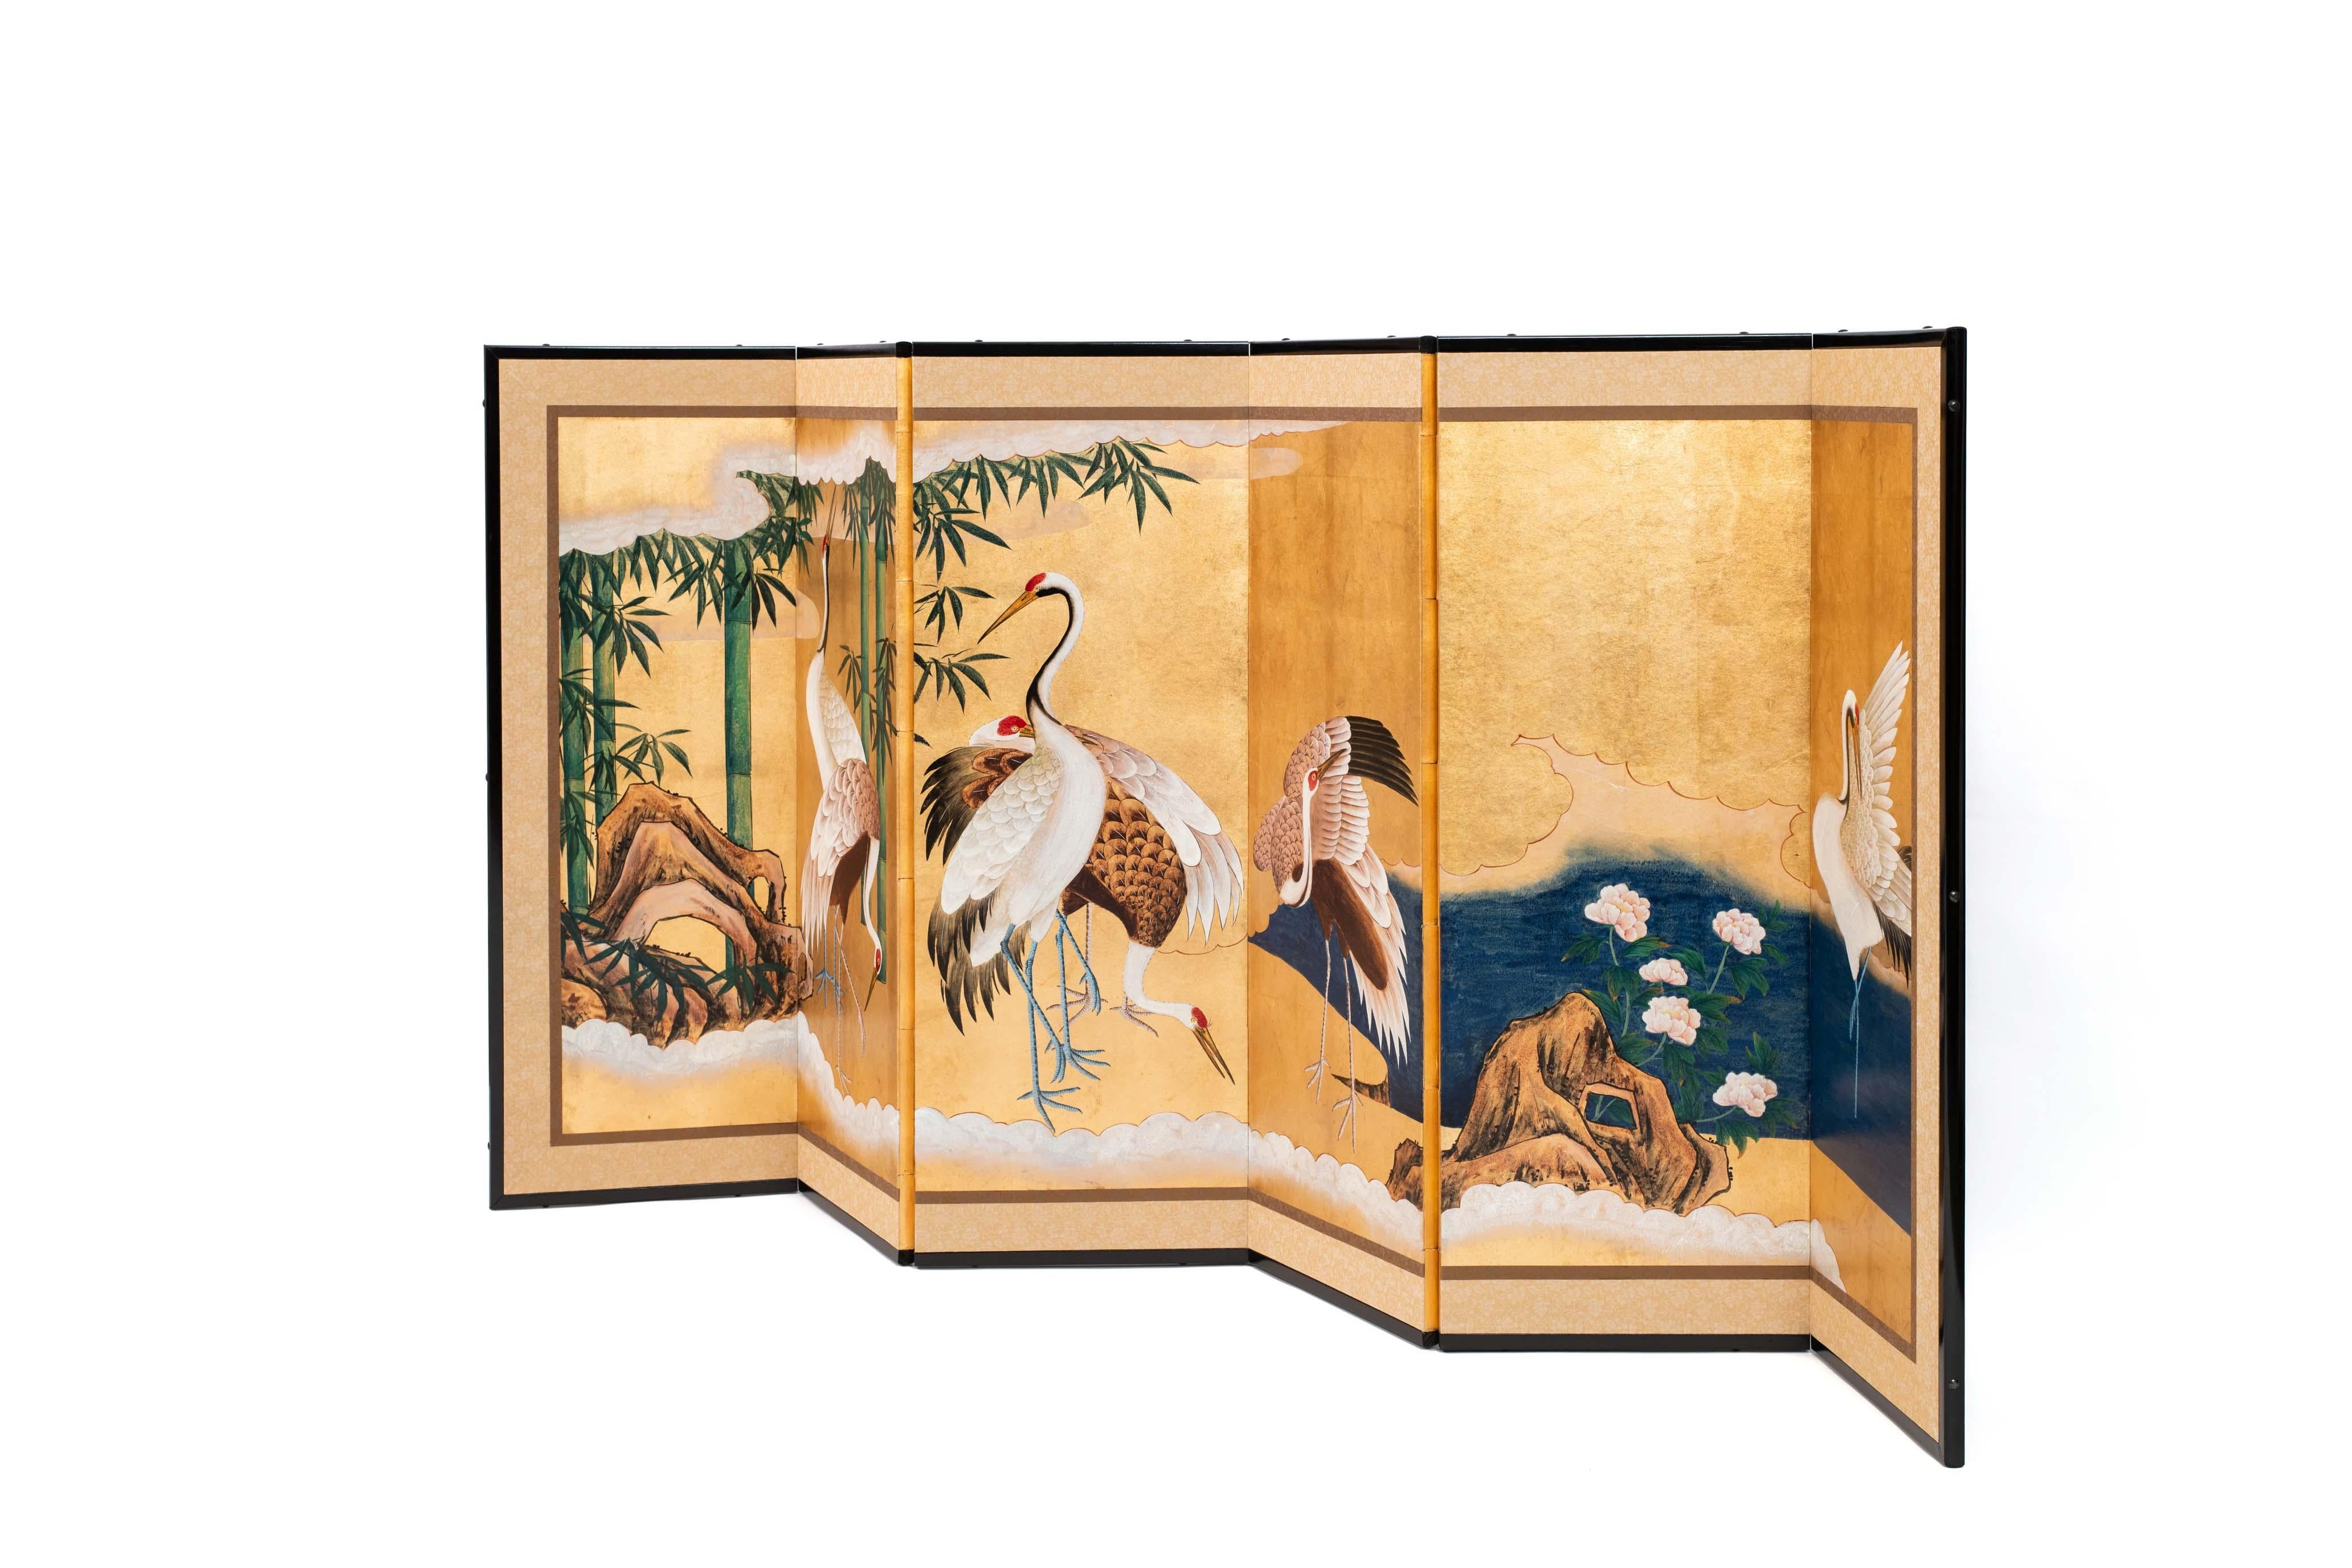 Chinese Contemporary Hand-Painted Japanese Screen of Gathering of Cranes